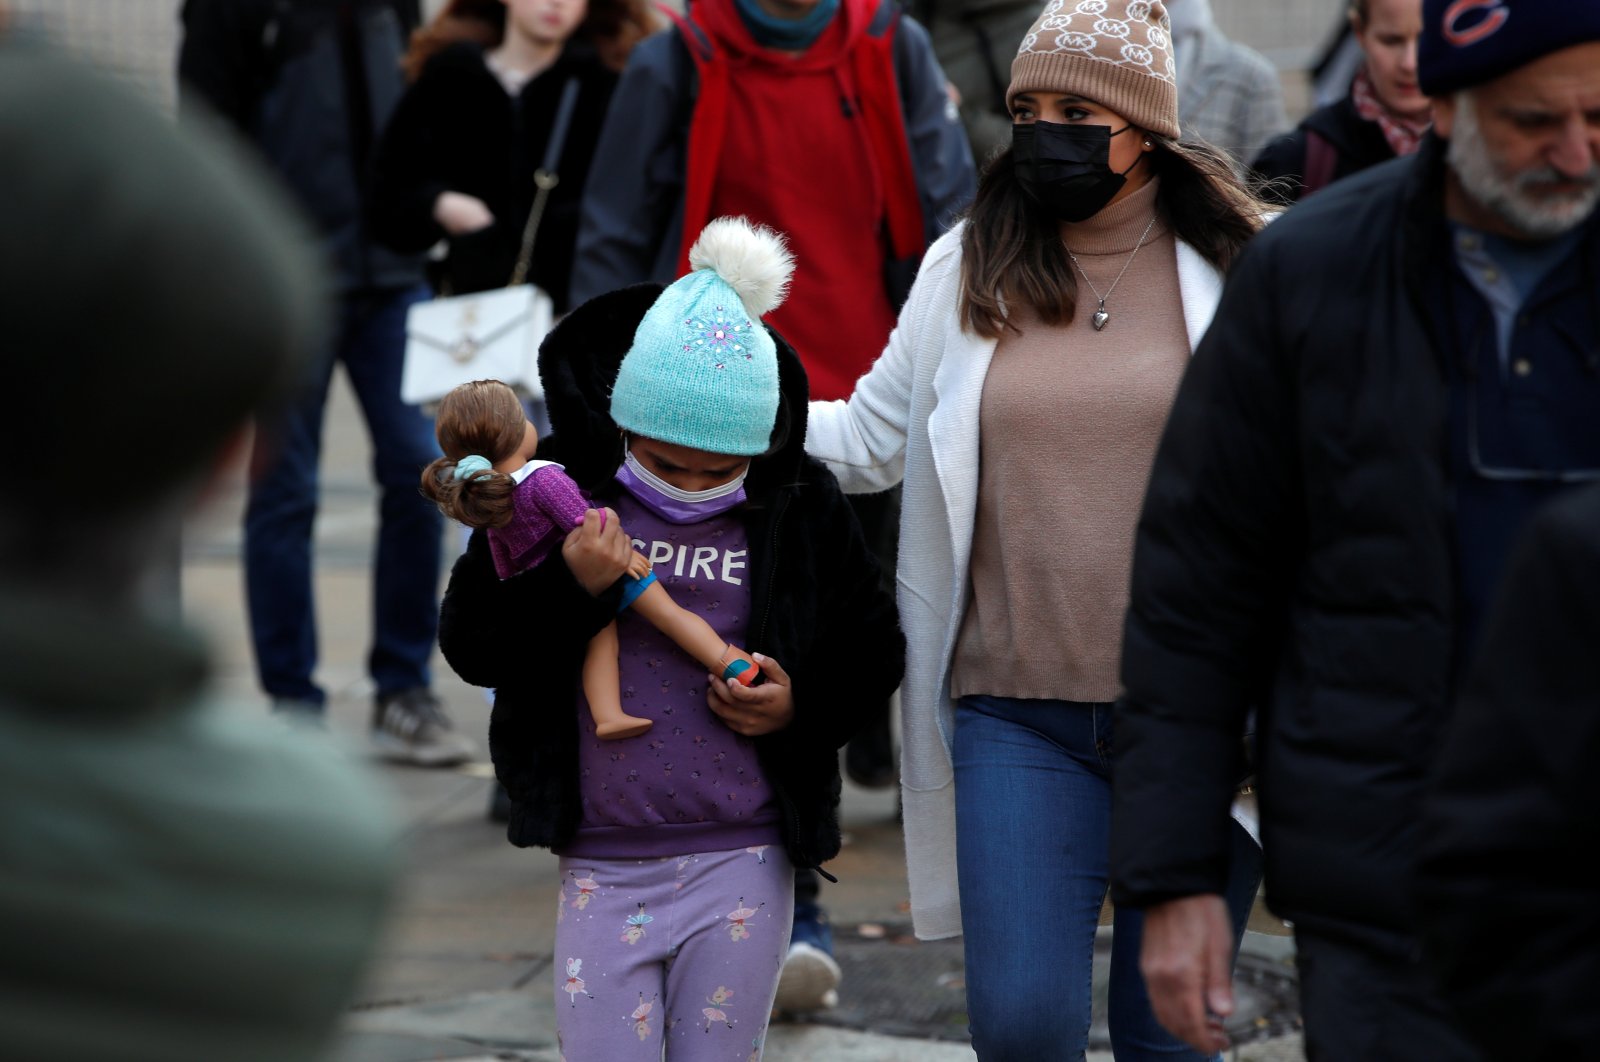 A mother and child wear protective face masks in lower Manhattan after New York City Mayor Bill de Blasio announced that all private-sector employers must implement COVID-19 vaccine mandates for their workers, as the highly transmissible omicron variant has spread to at least one-third of U.S. states, in New York, U.S., Dec. 6, 2021. (Reuters Photo)